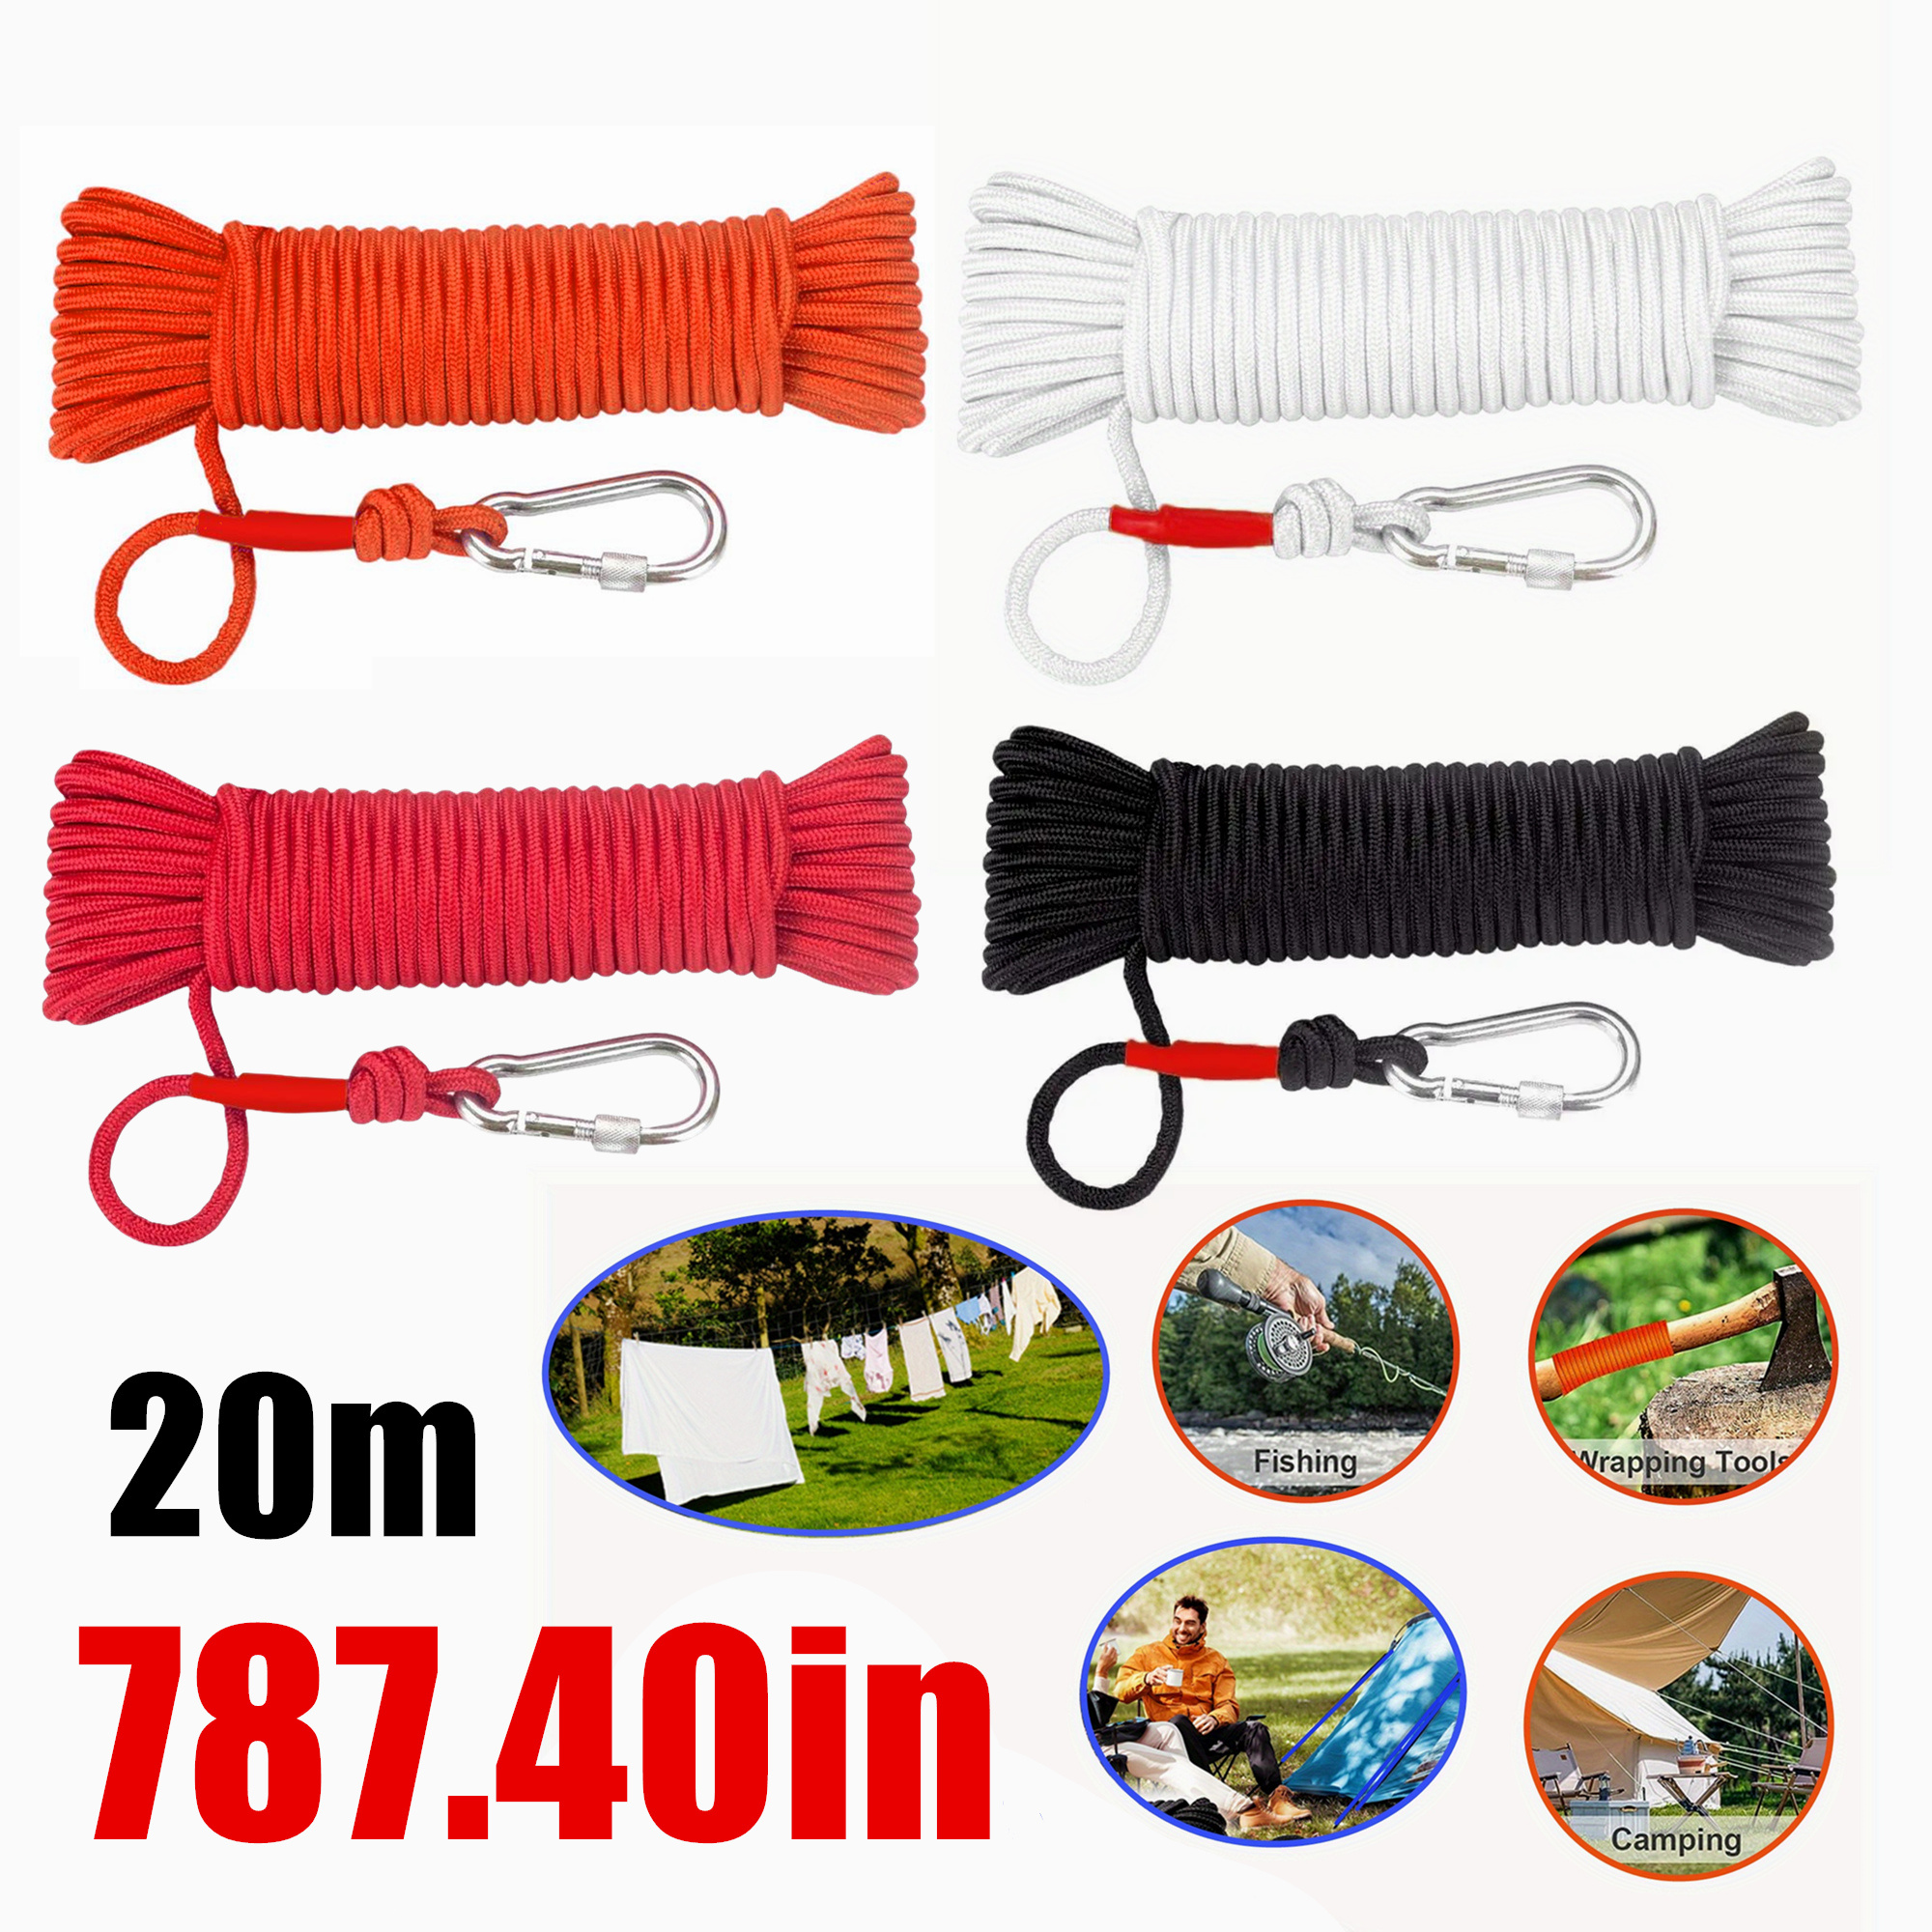 

Nylon Outdoor Clothesline 787.40in - Durable Multipurpose Rope With Hook For Camping, Fishing, Hiking, Dog Leash, And Adventure Sports - 1pc